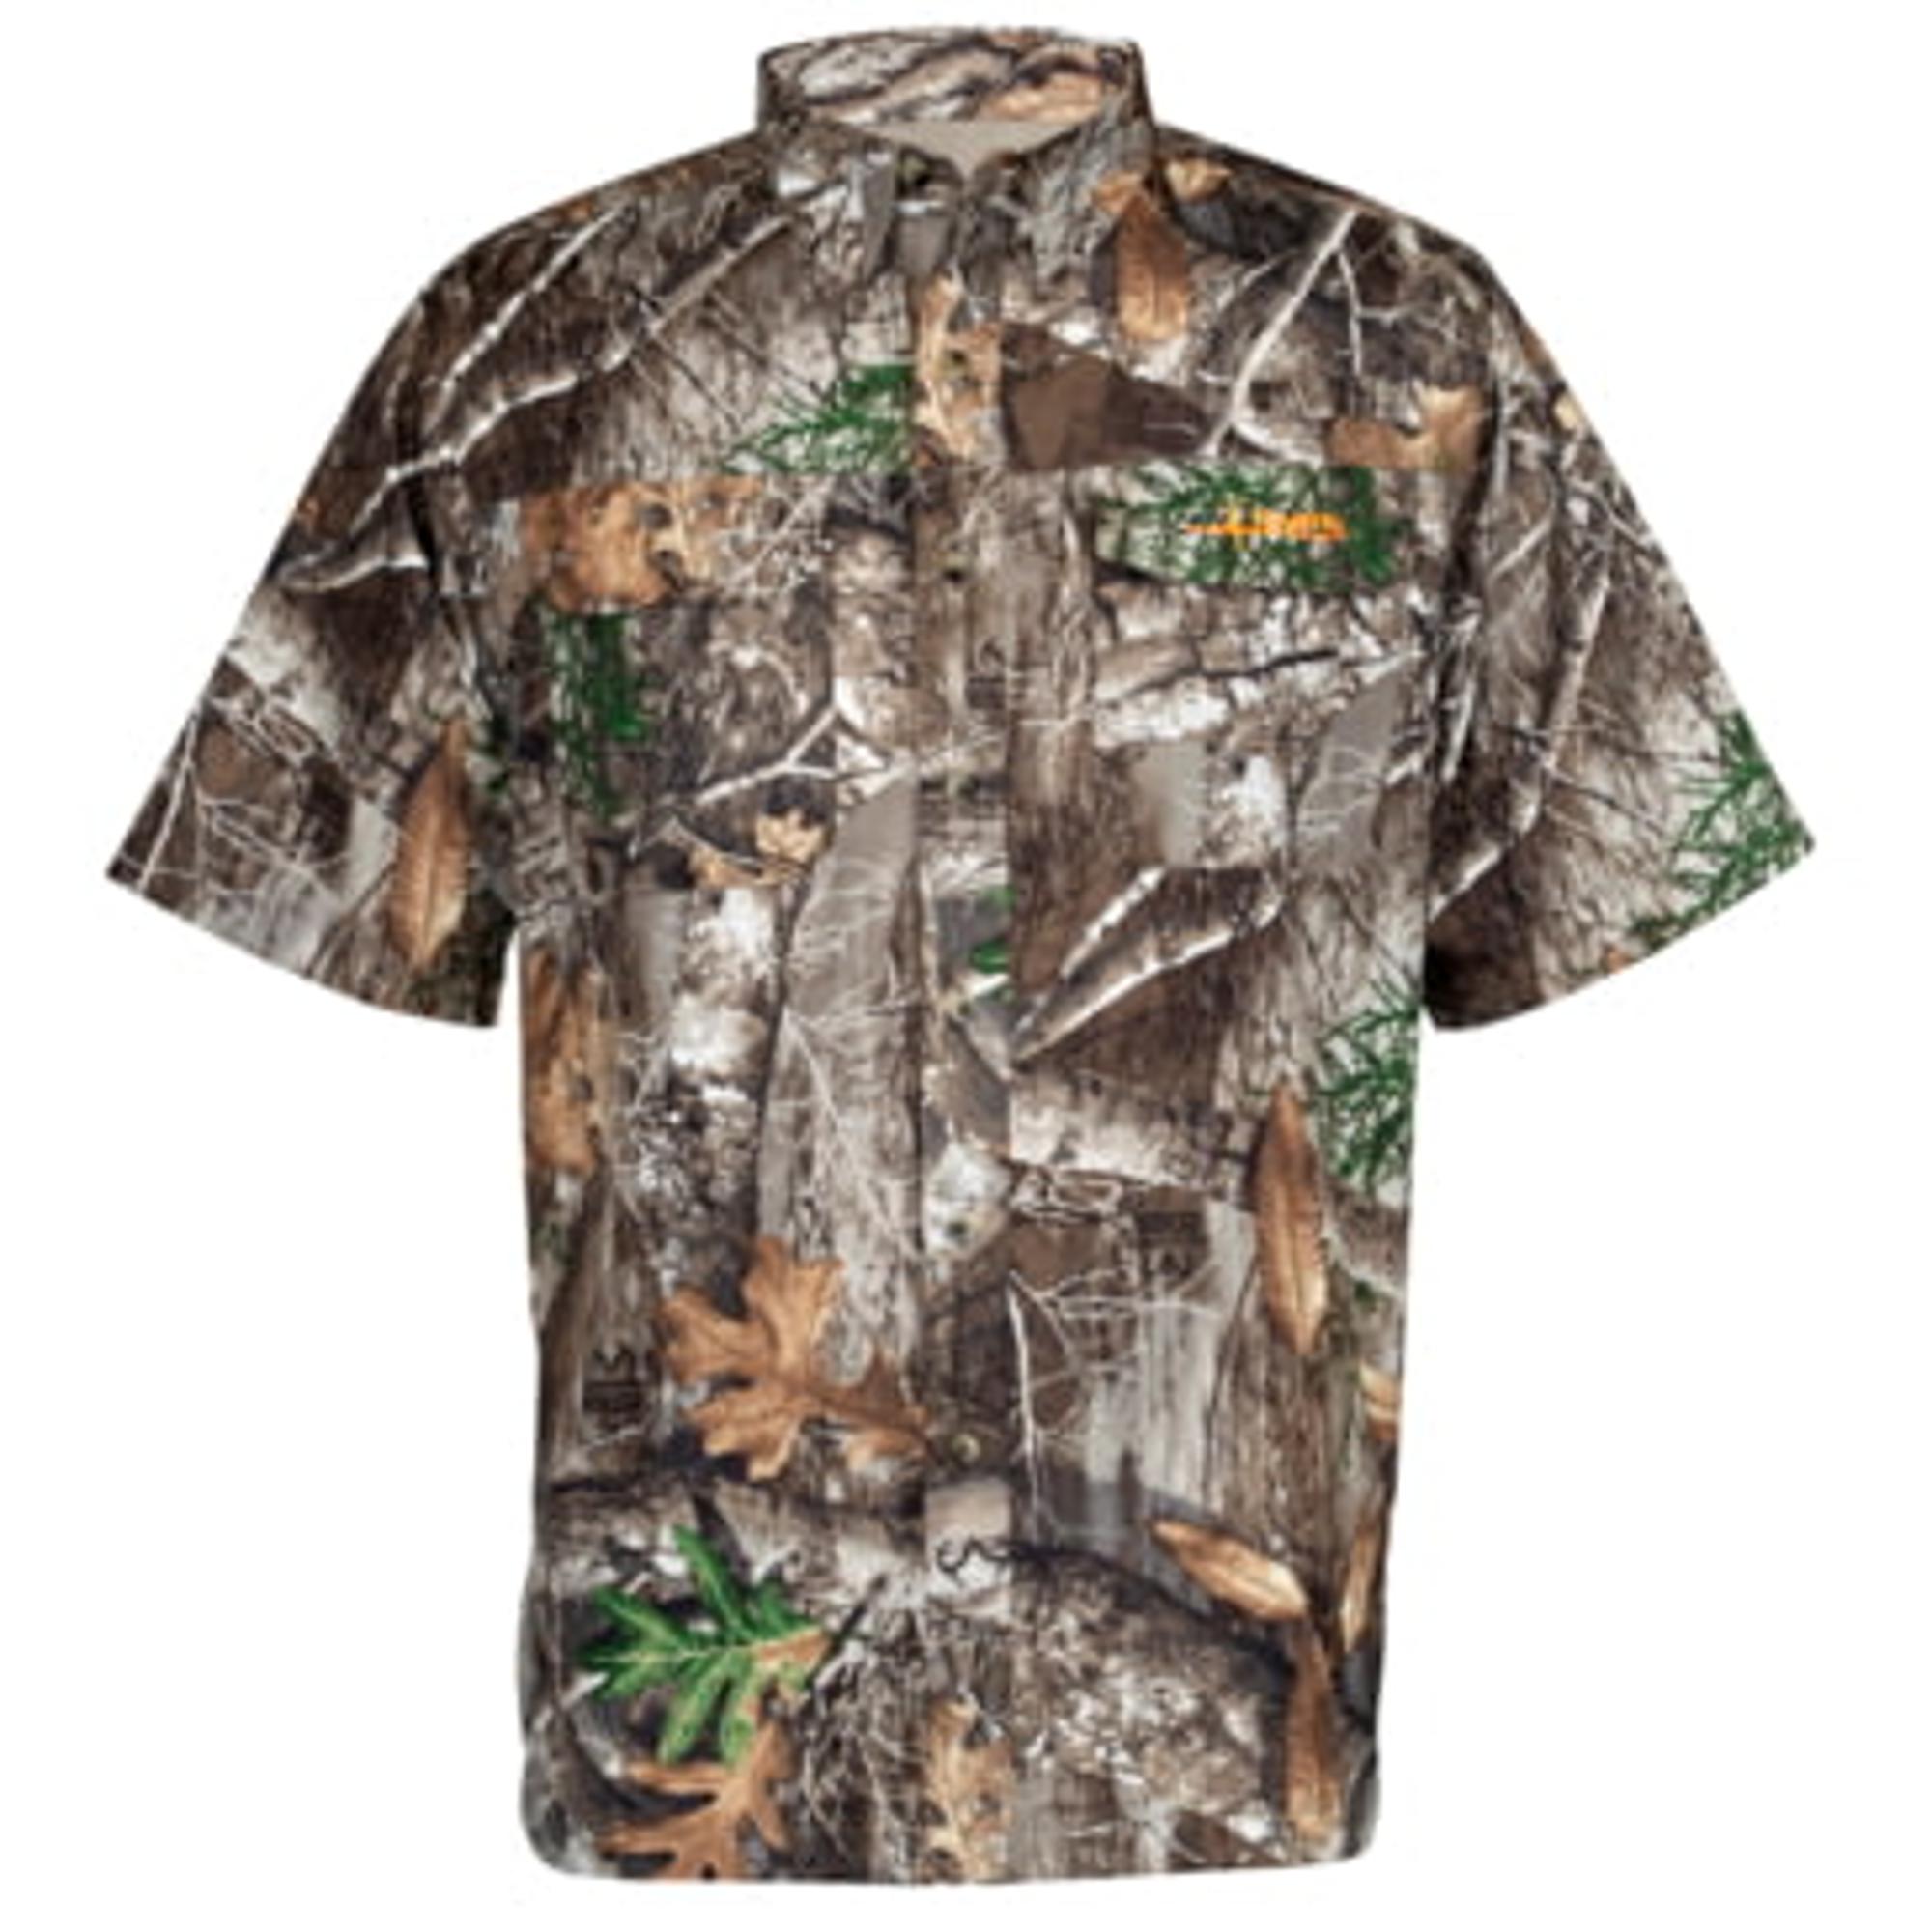 Outfitter Junction River Short Sleeve Camo Shirt